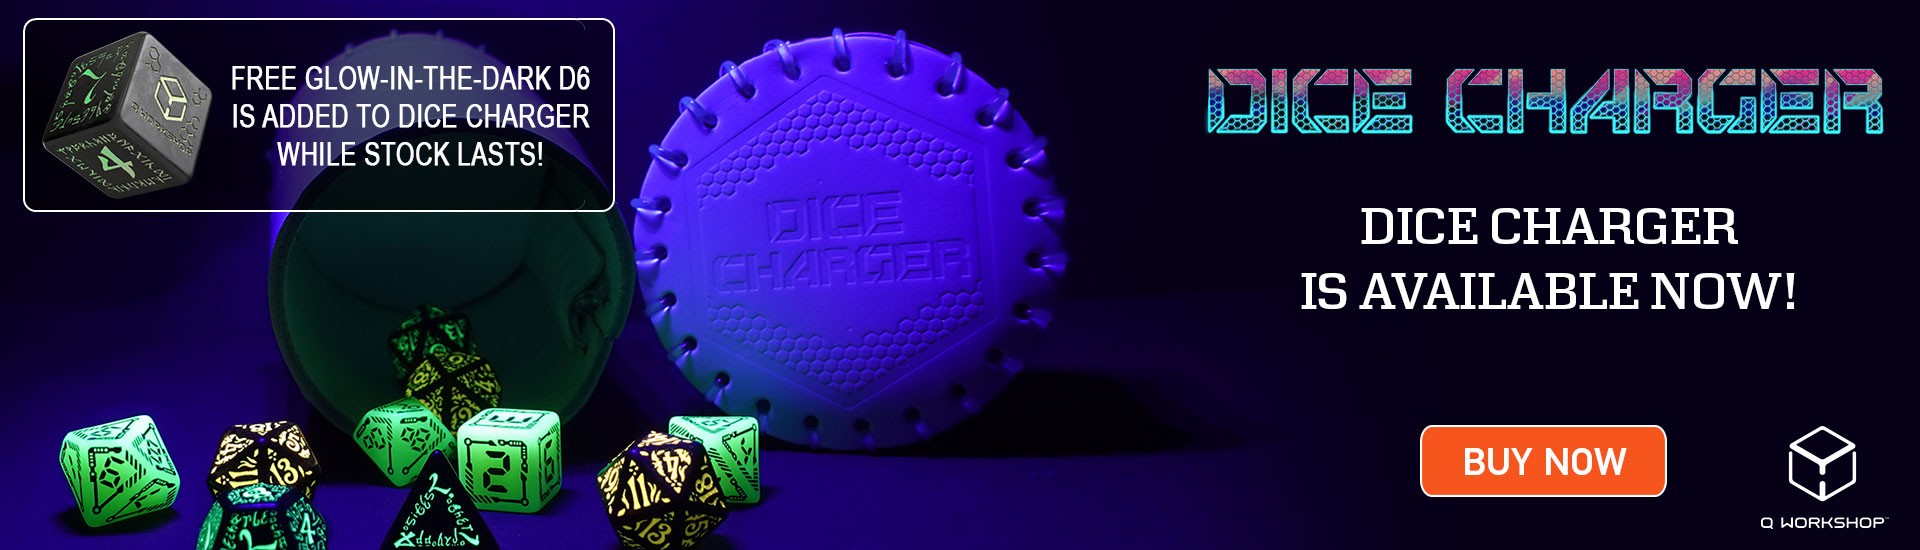 Dice Charger